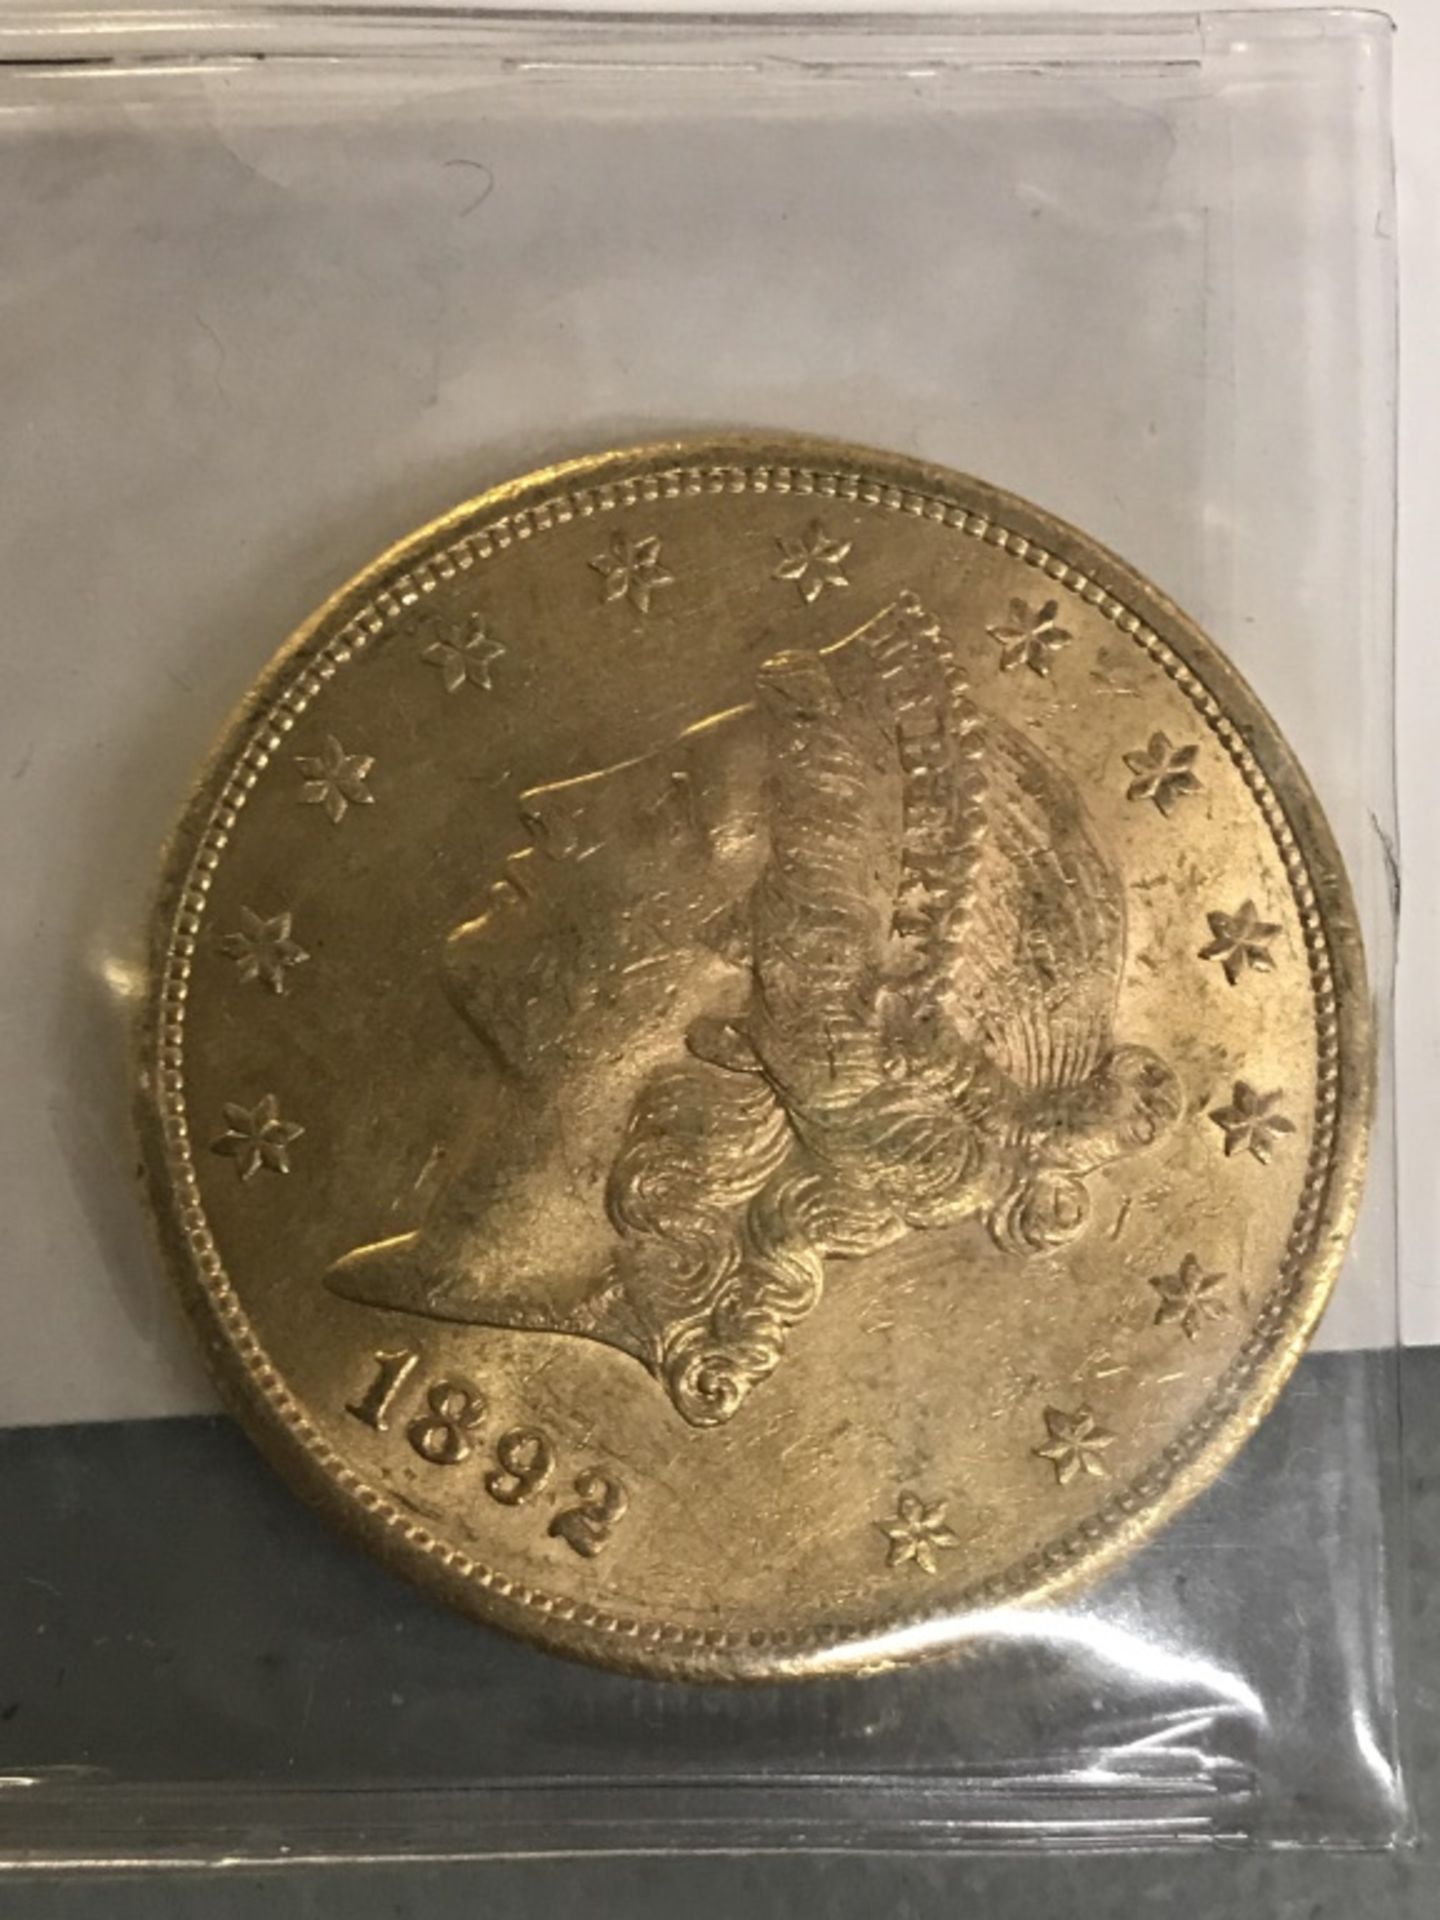 $20 Us Gold 1892 Coin - Image 3 of 9